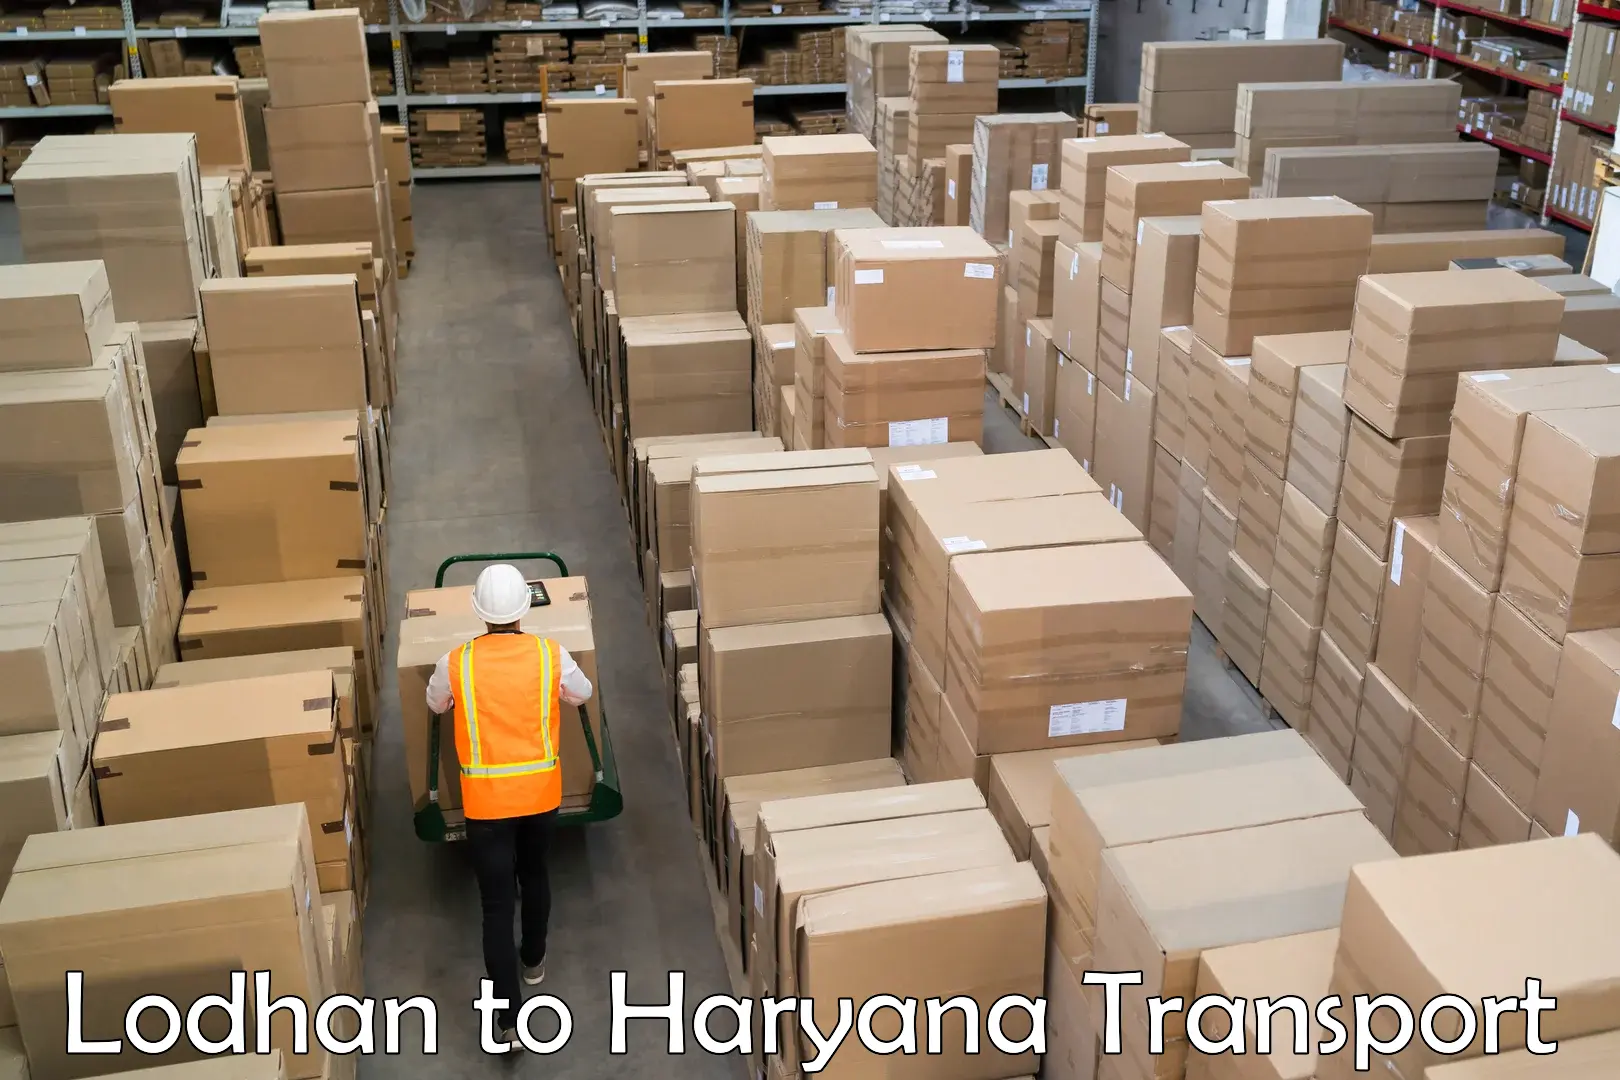 Truck transport companies in India Lodhan to Gohana